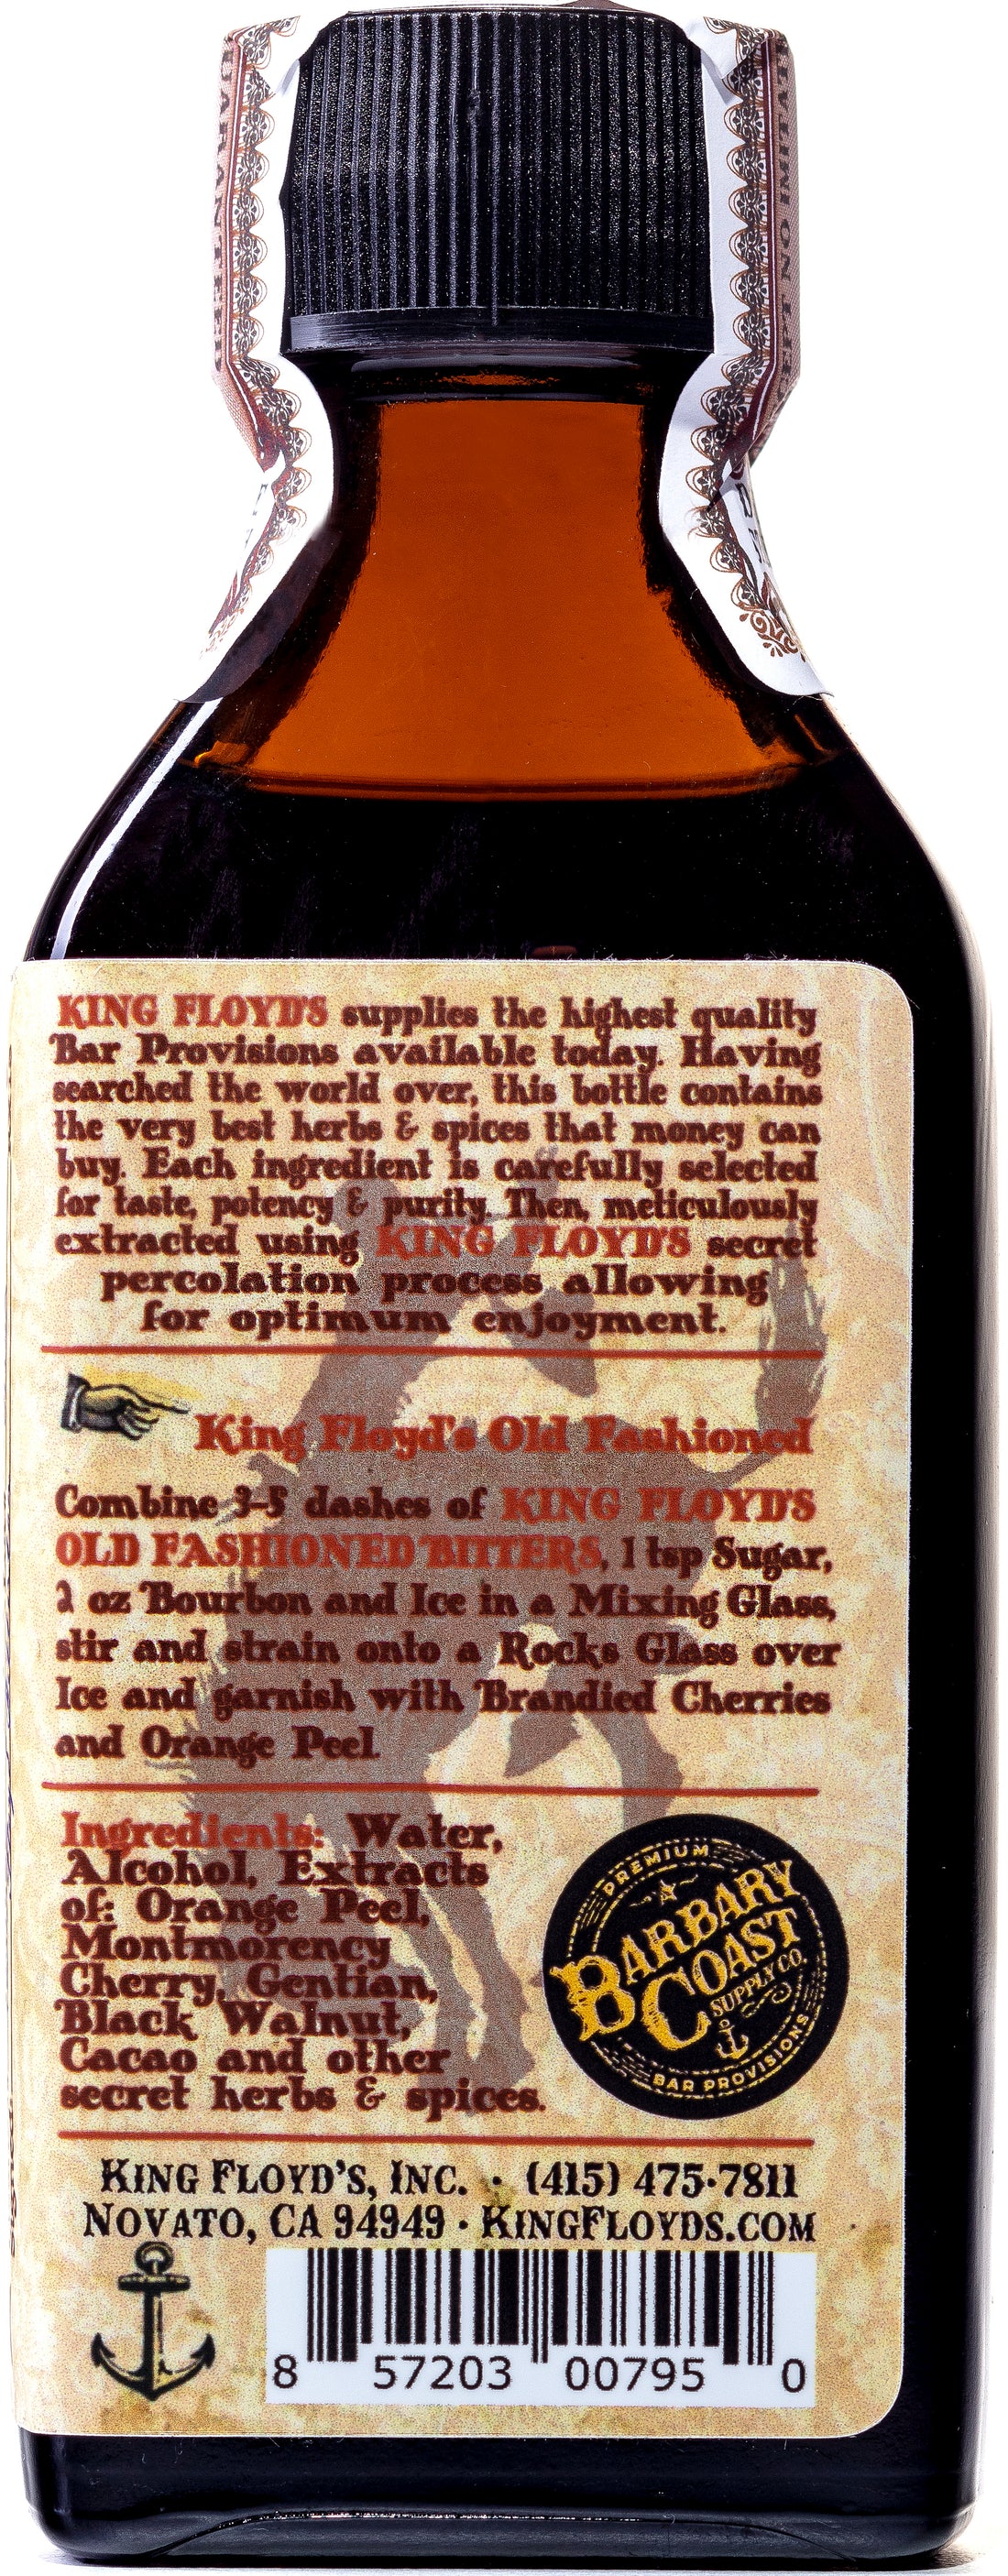 KING FLOYD'S Old Fashioned Bitters